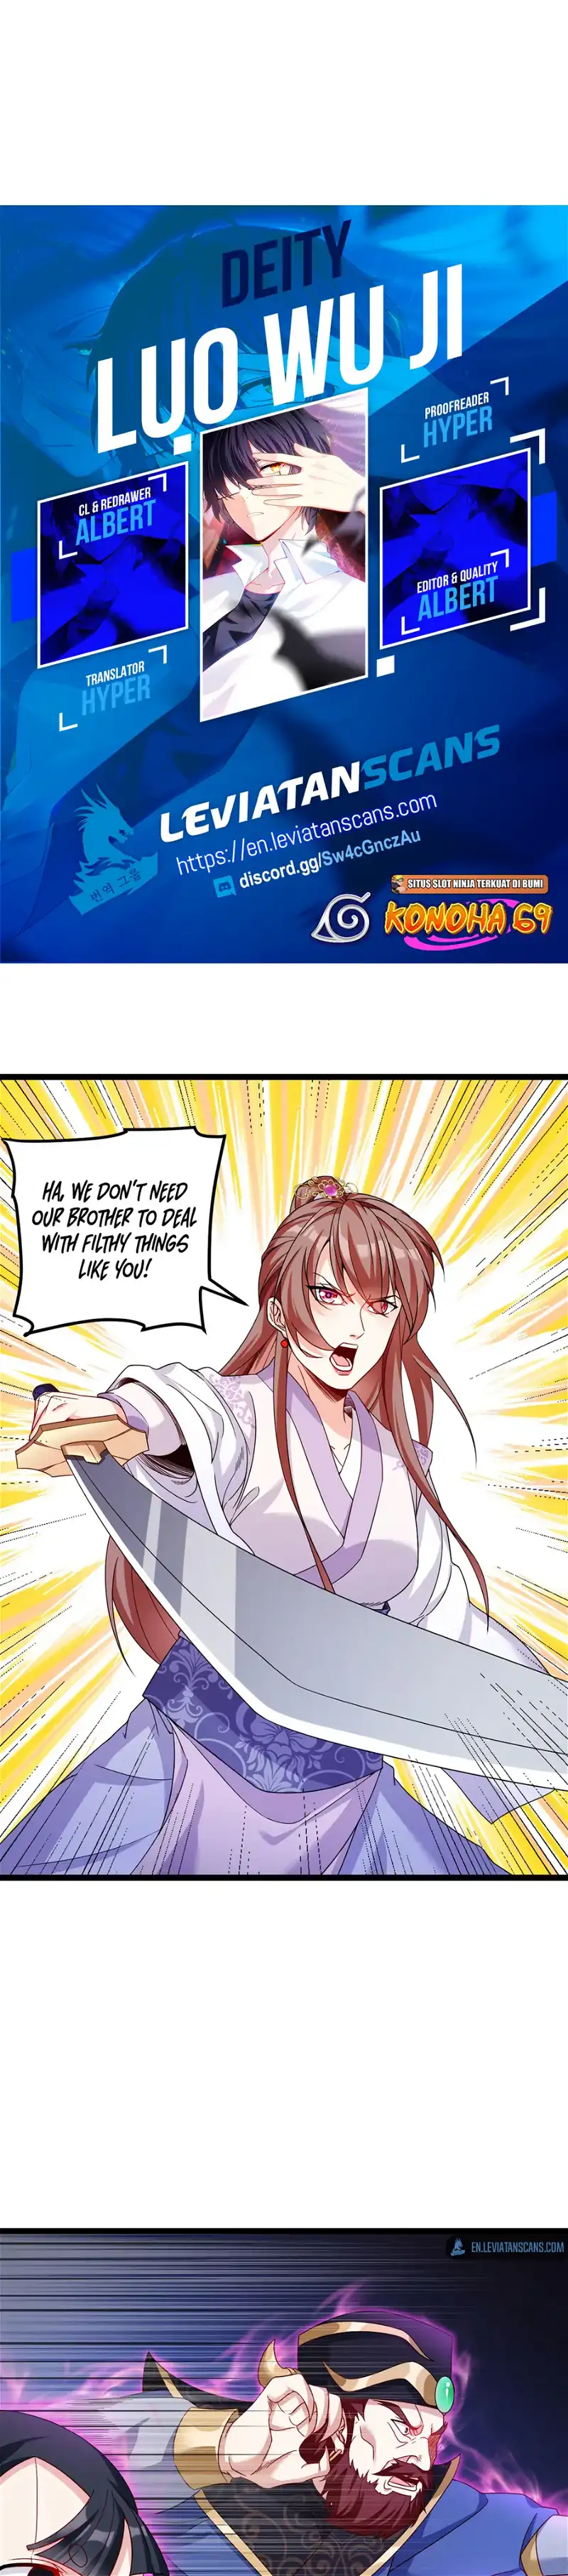 The Immortal Emperor Luo Wuji has returned Chapter 208 - page 3